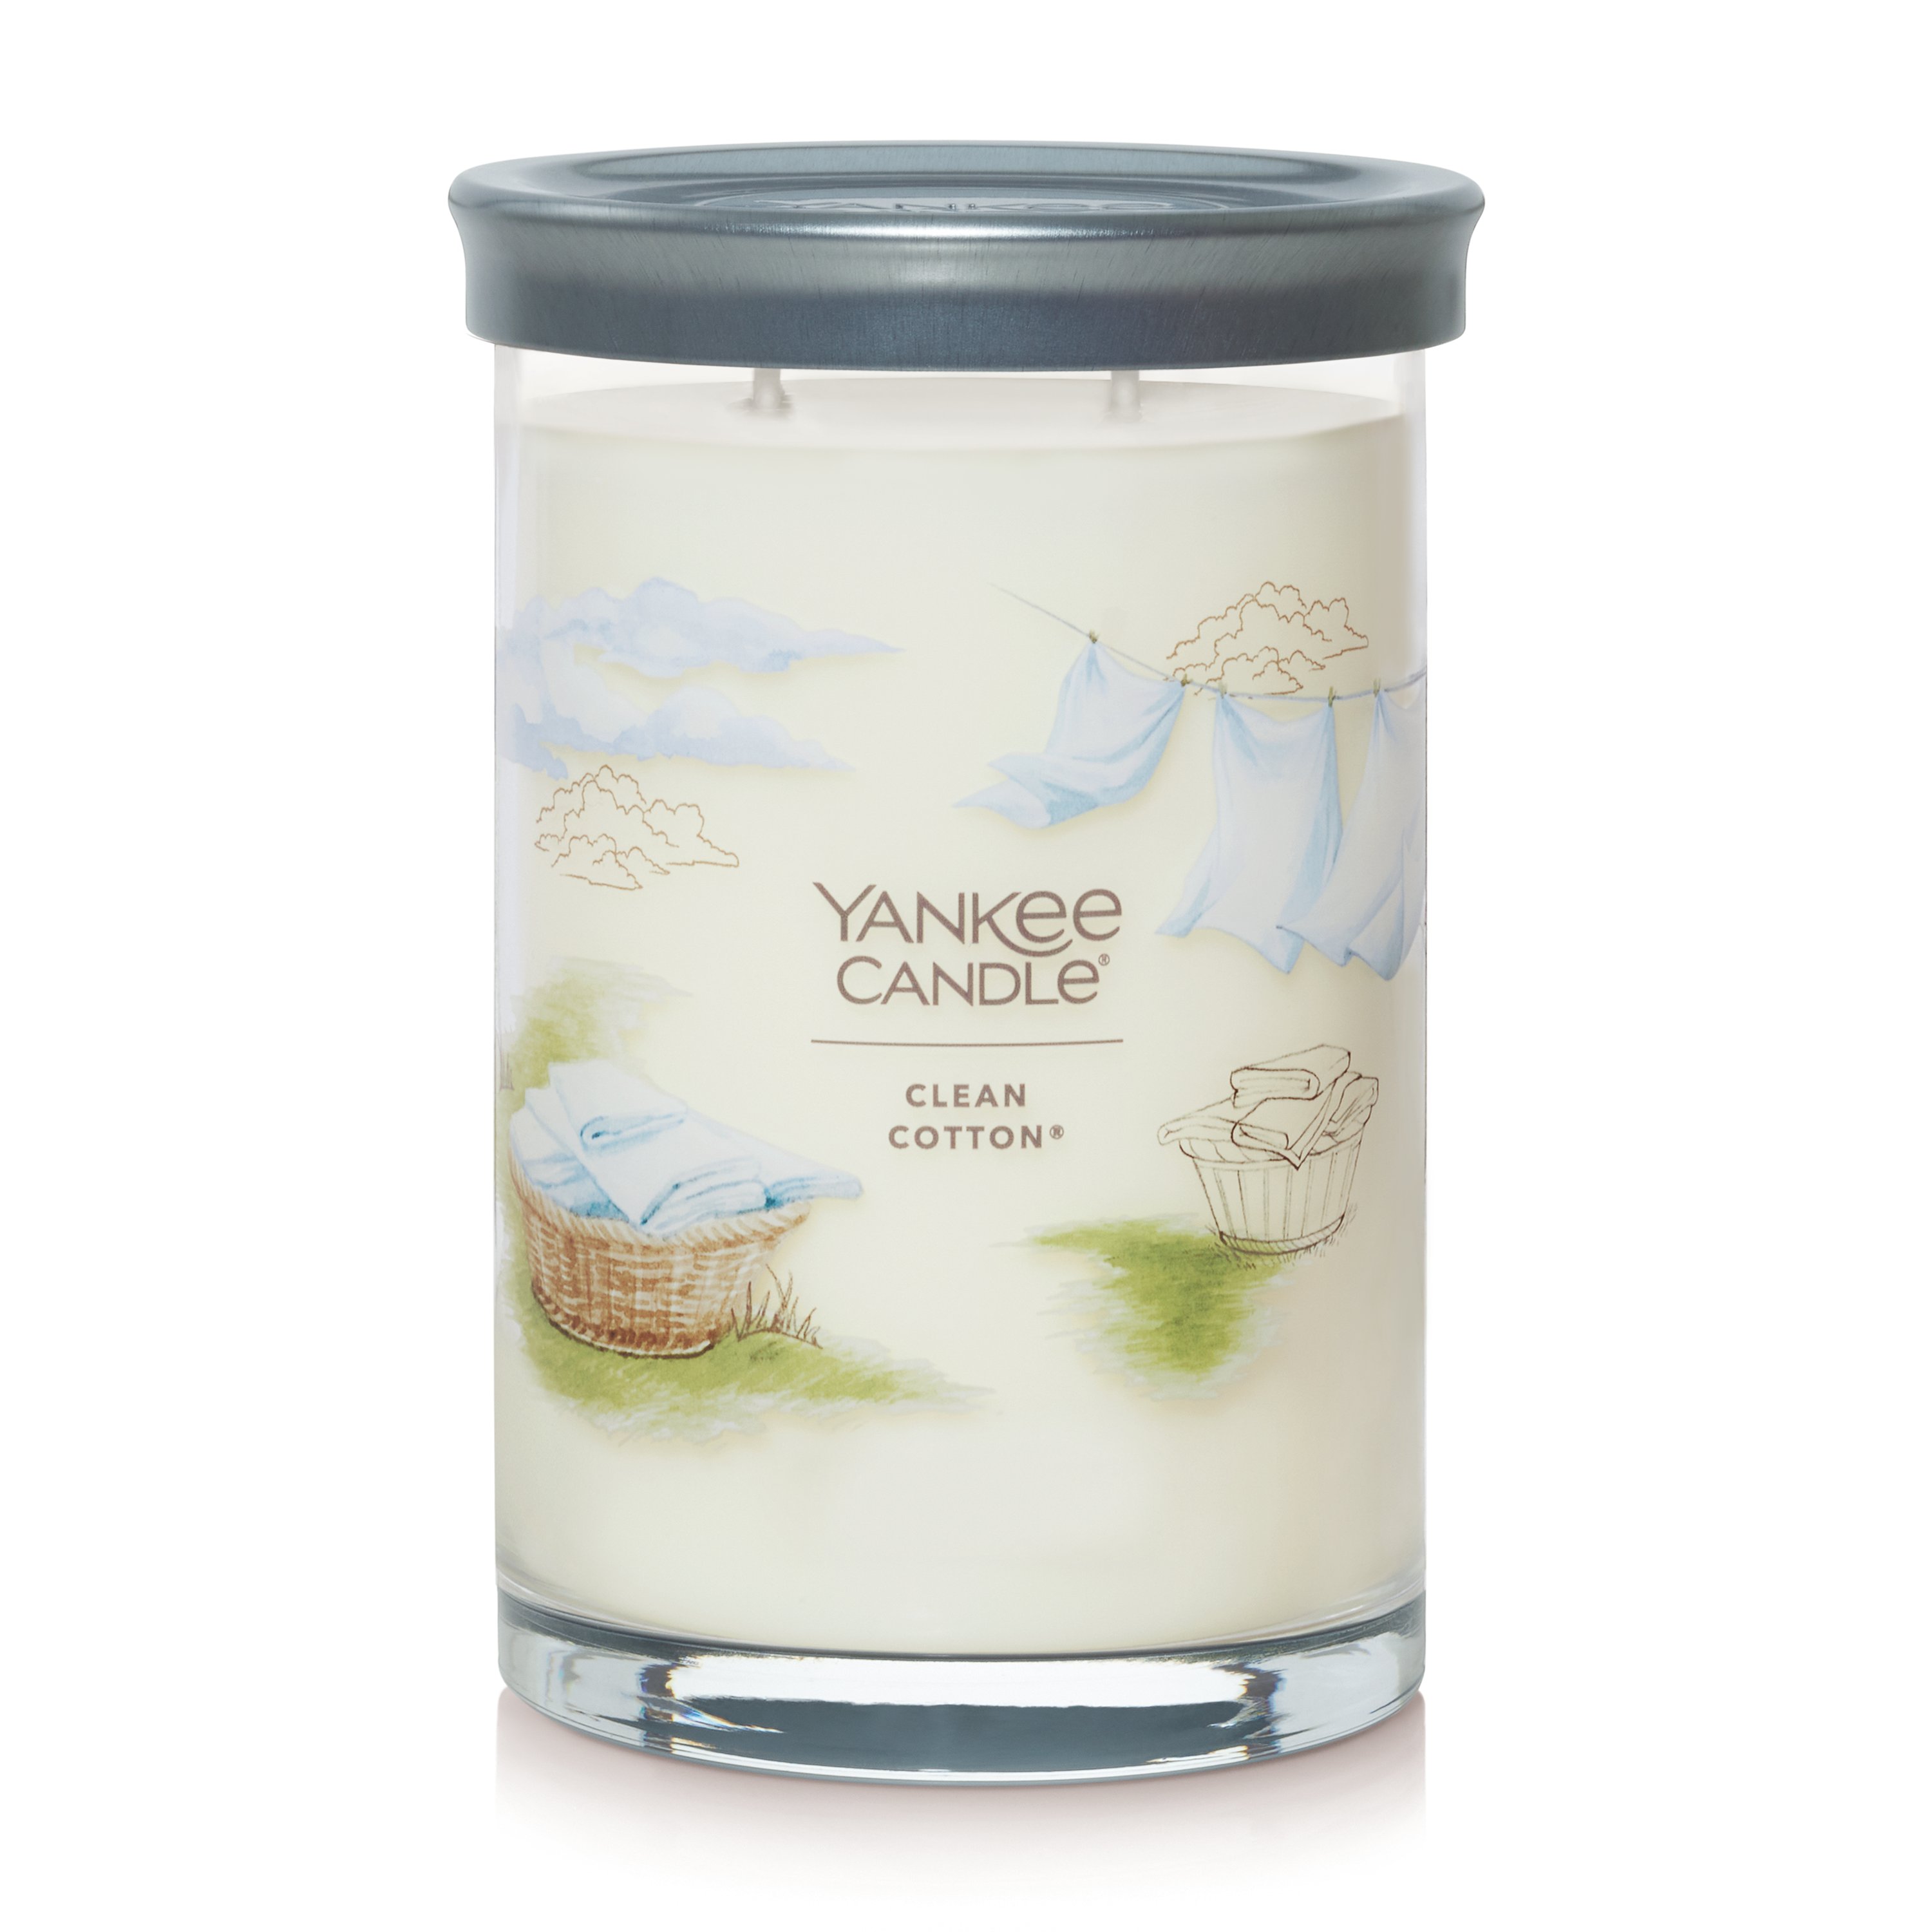 YANKEE CANDLE Tumbler Clean Cotton Scented Jar Candle & Reviews